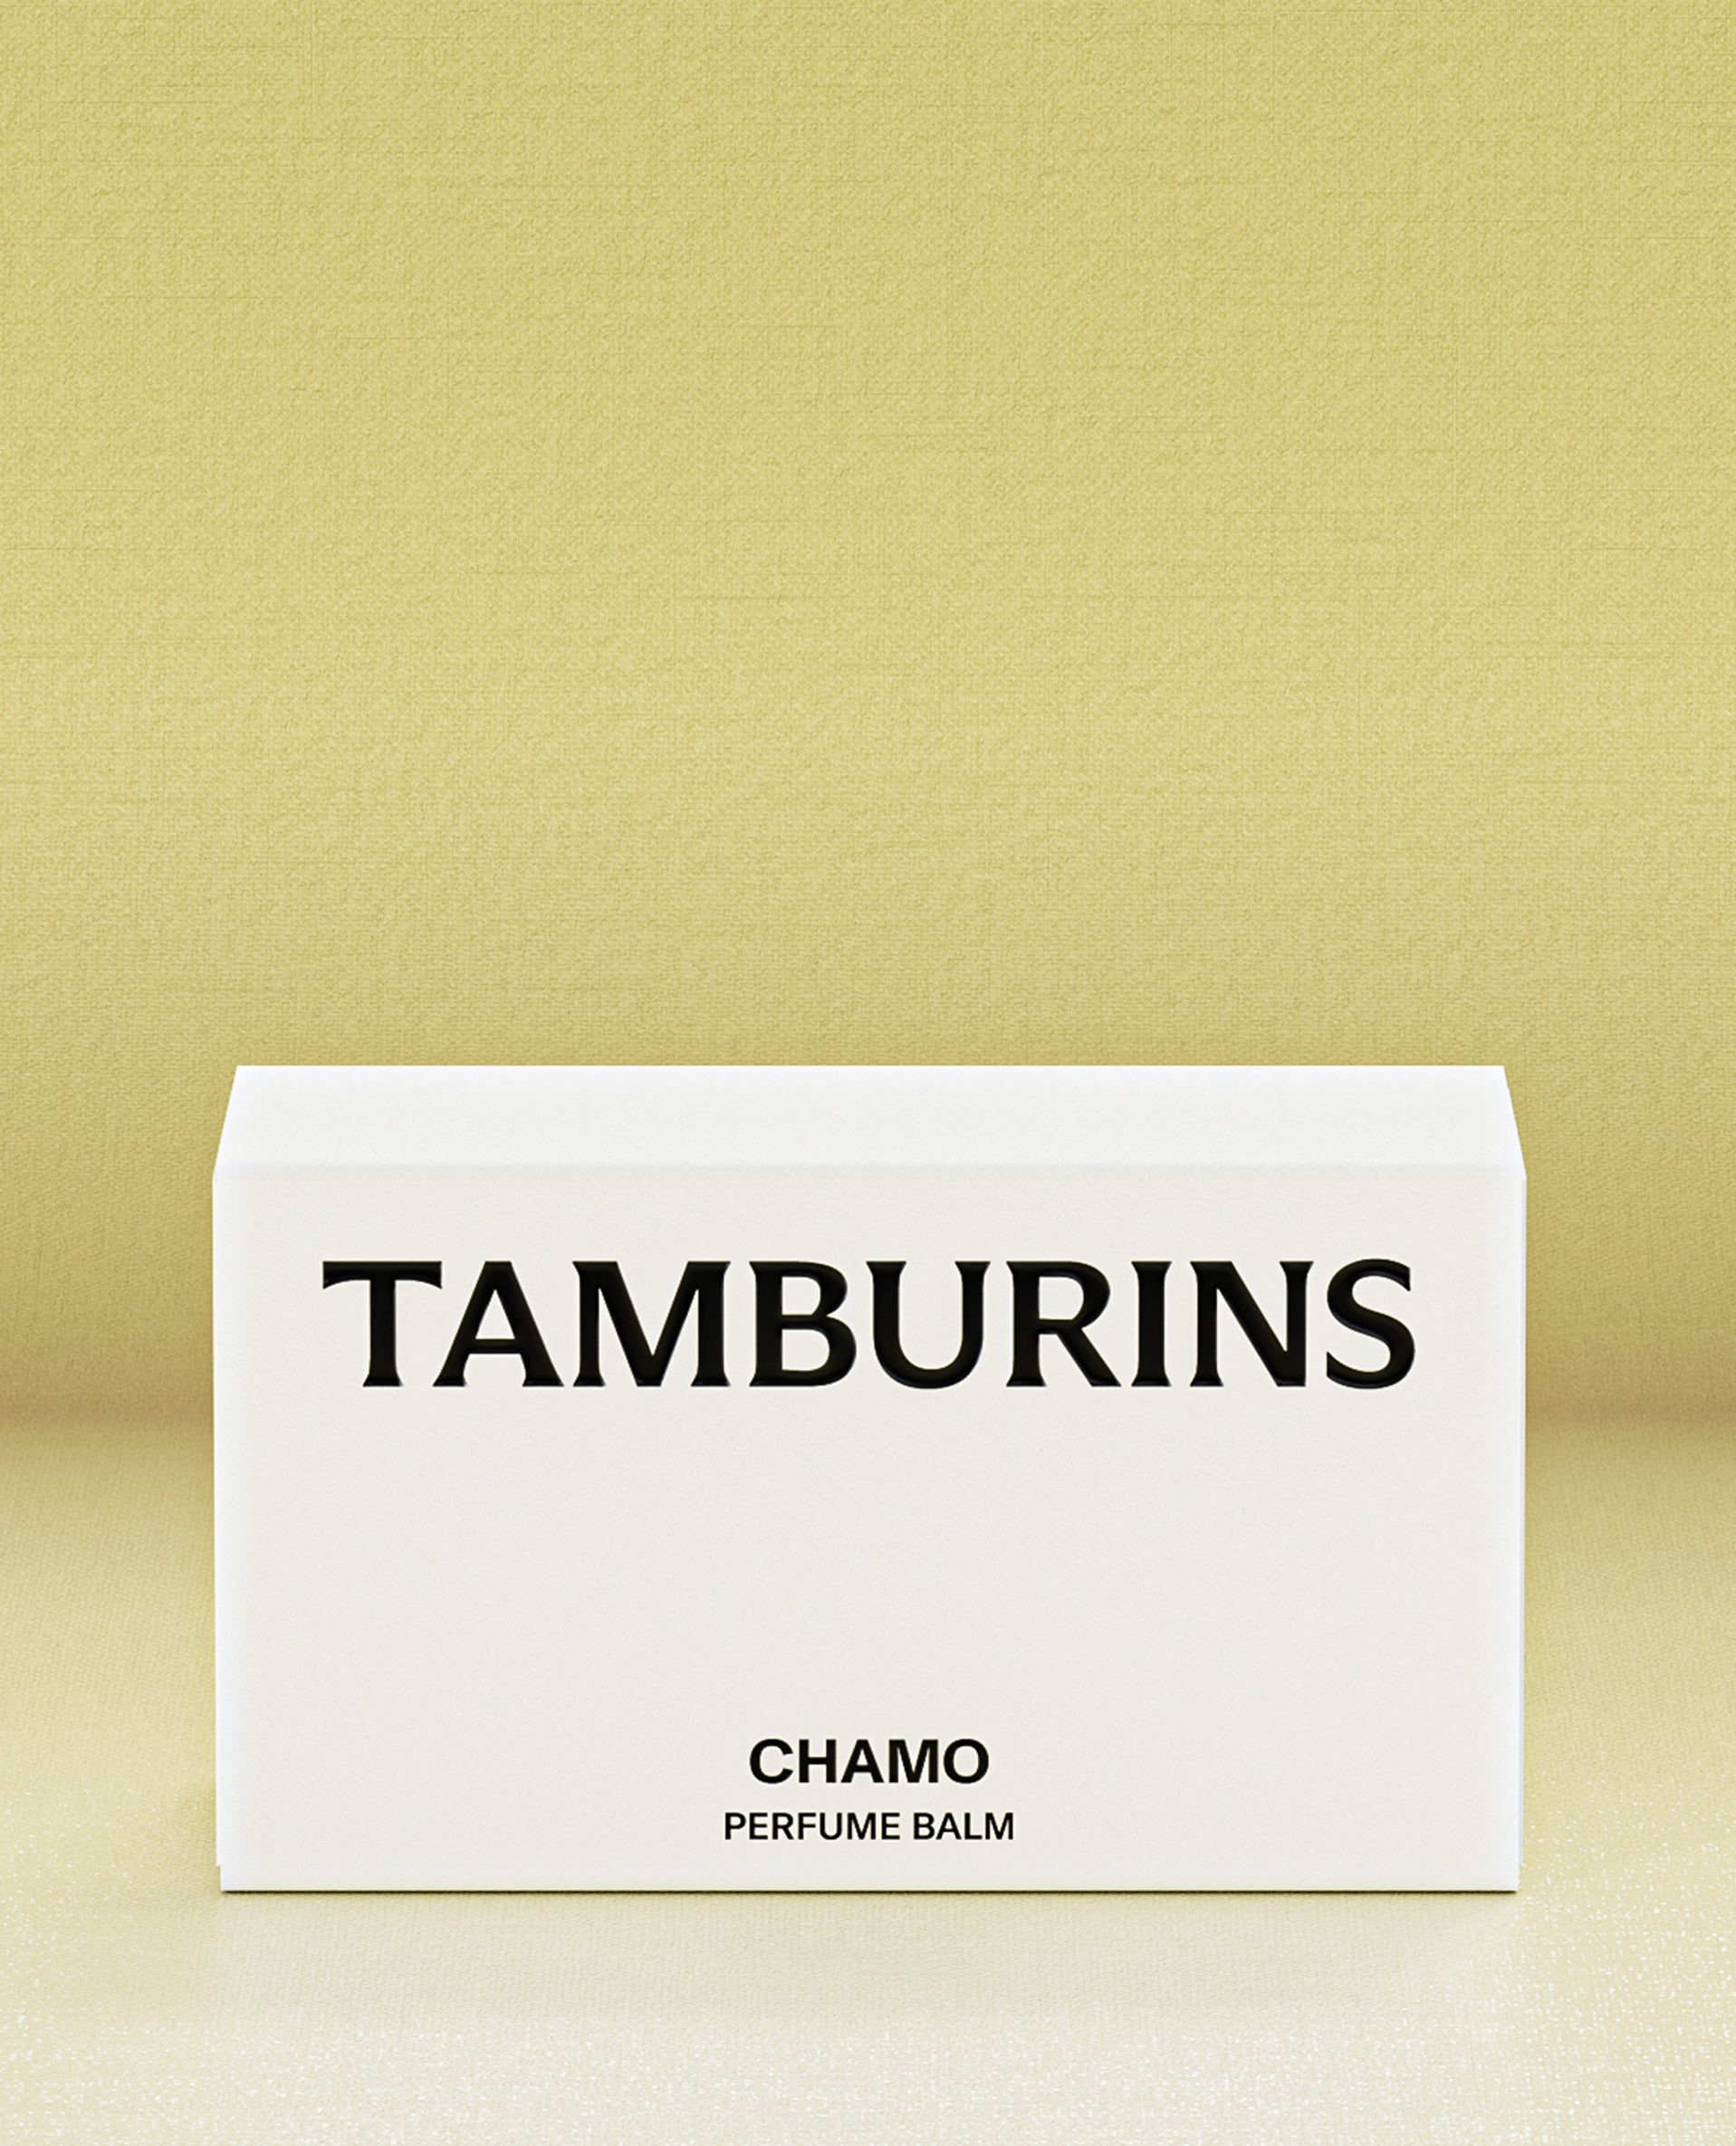 TAMBURINS Perfume Balm Chamo 6.5g - A convenient 6.5g perfume balm with a soothing chamo scent.